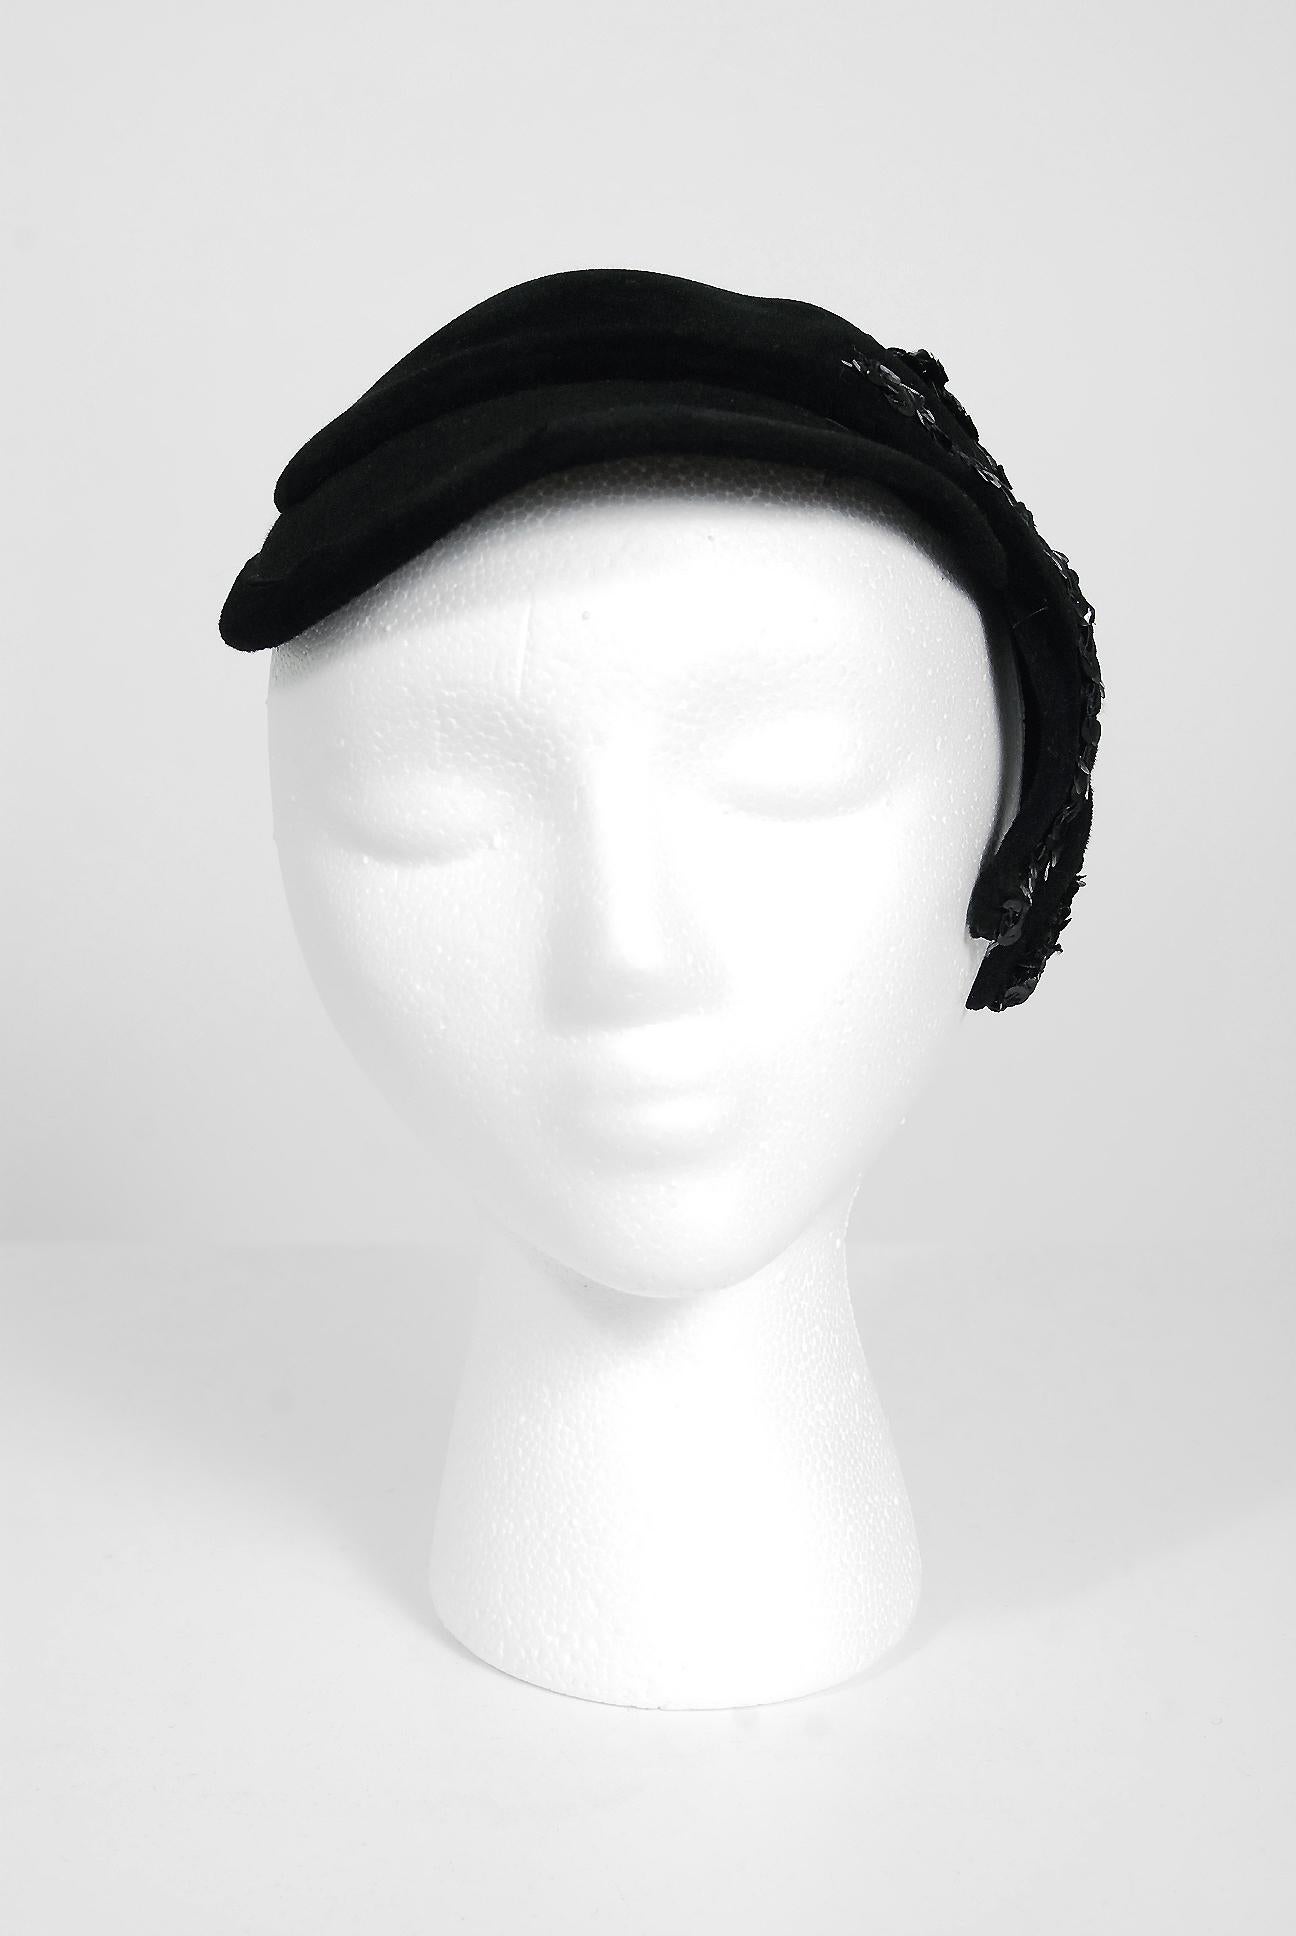 Gorgeous 1950's Dolly Madison designer black velour hat for the lady who likes statement in her style. I love the unique asymmetric novelty side 